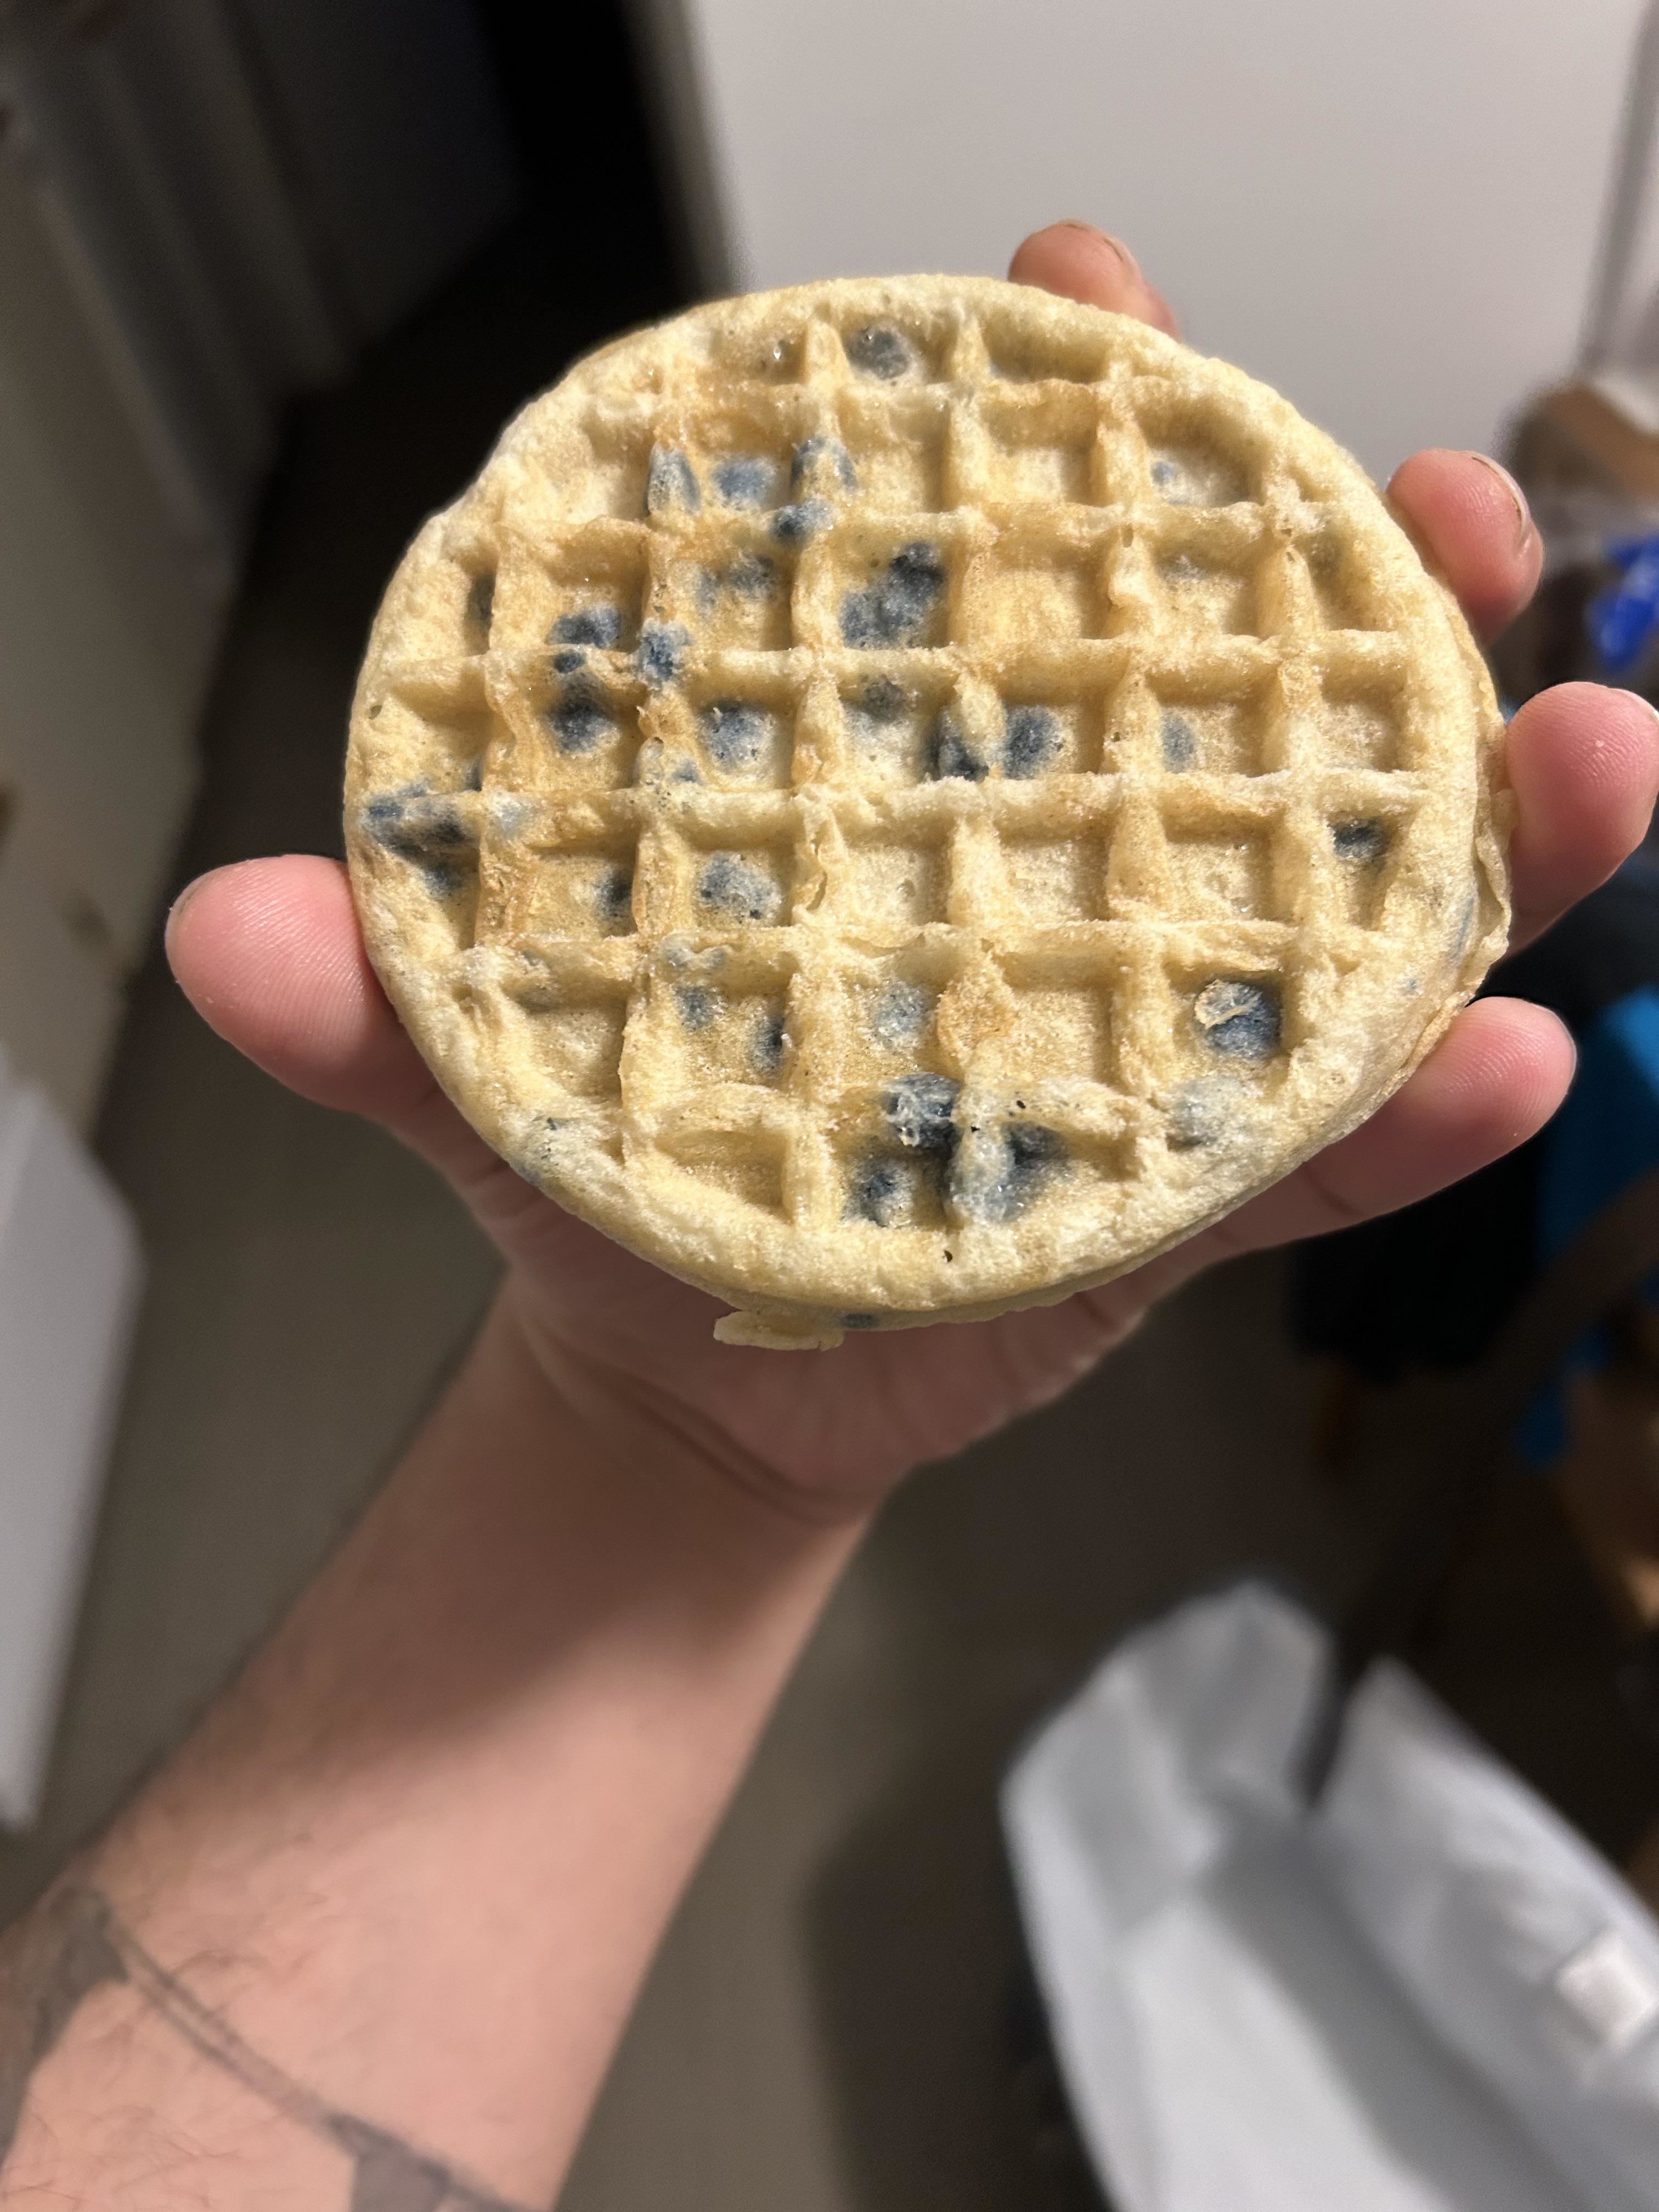 A person holding a mouldy waffle